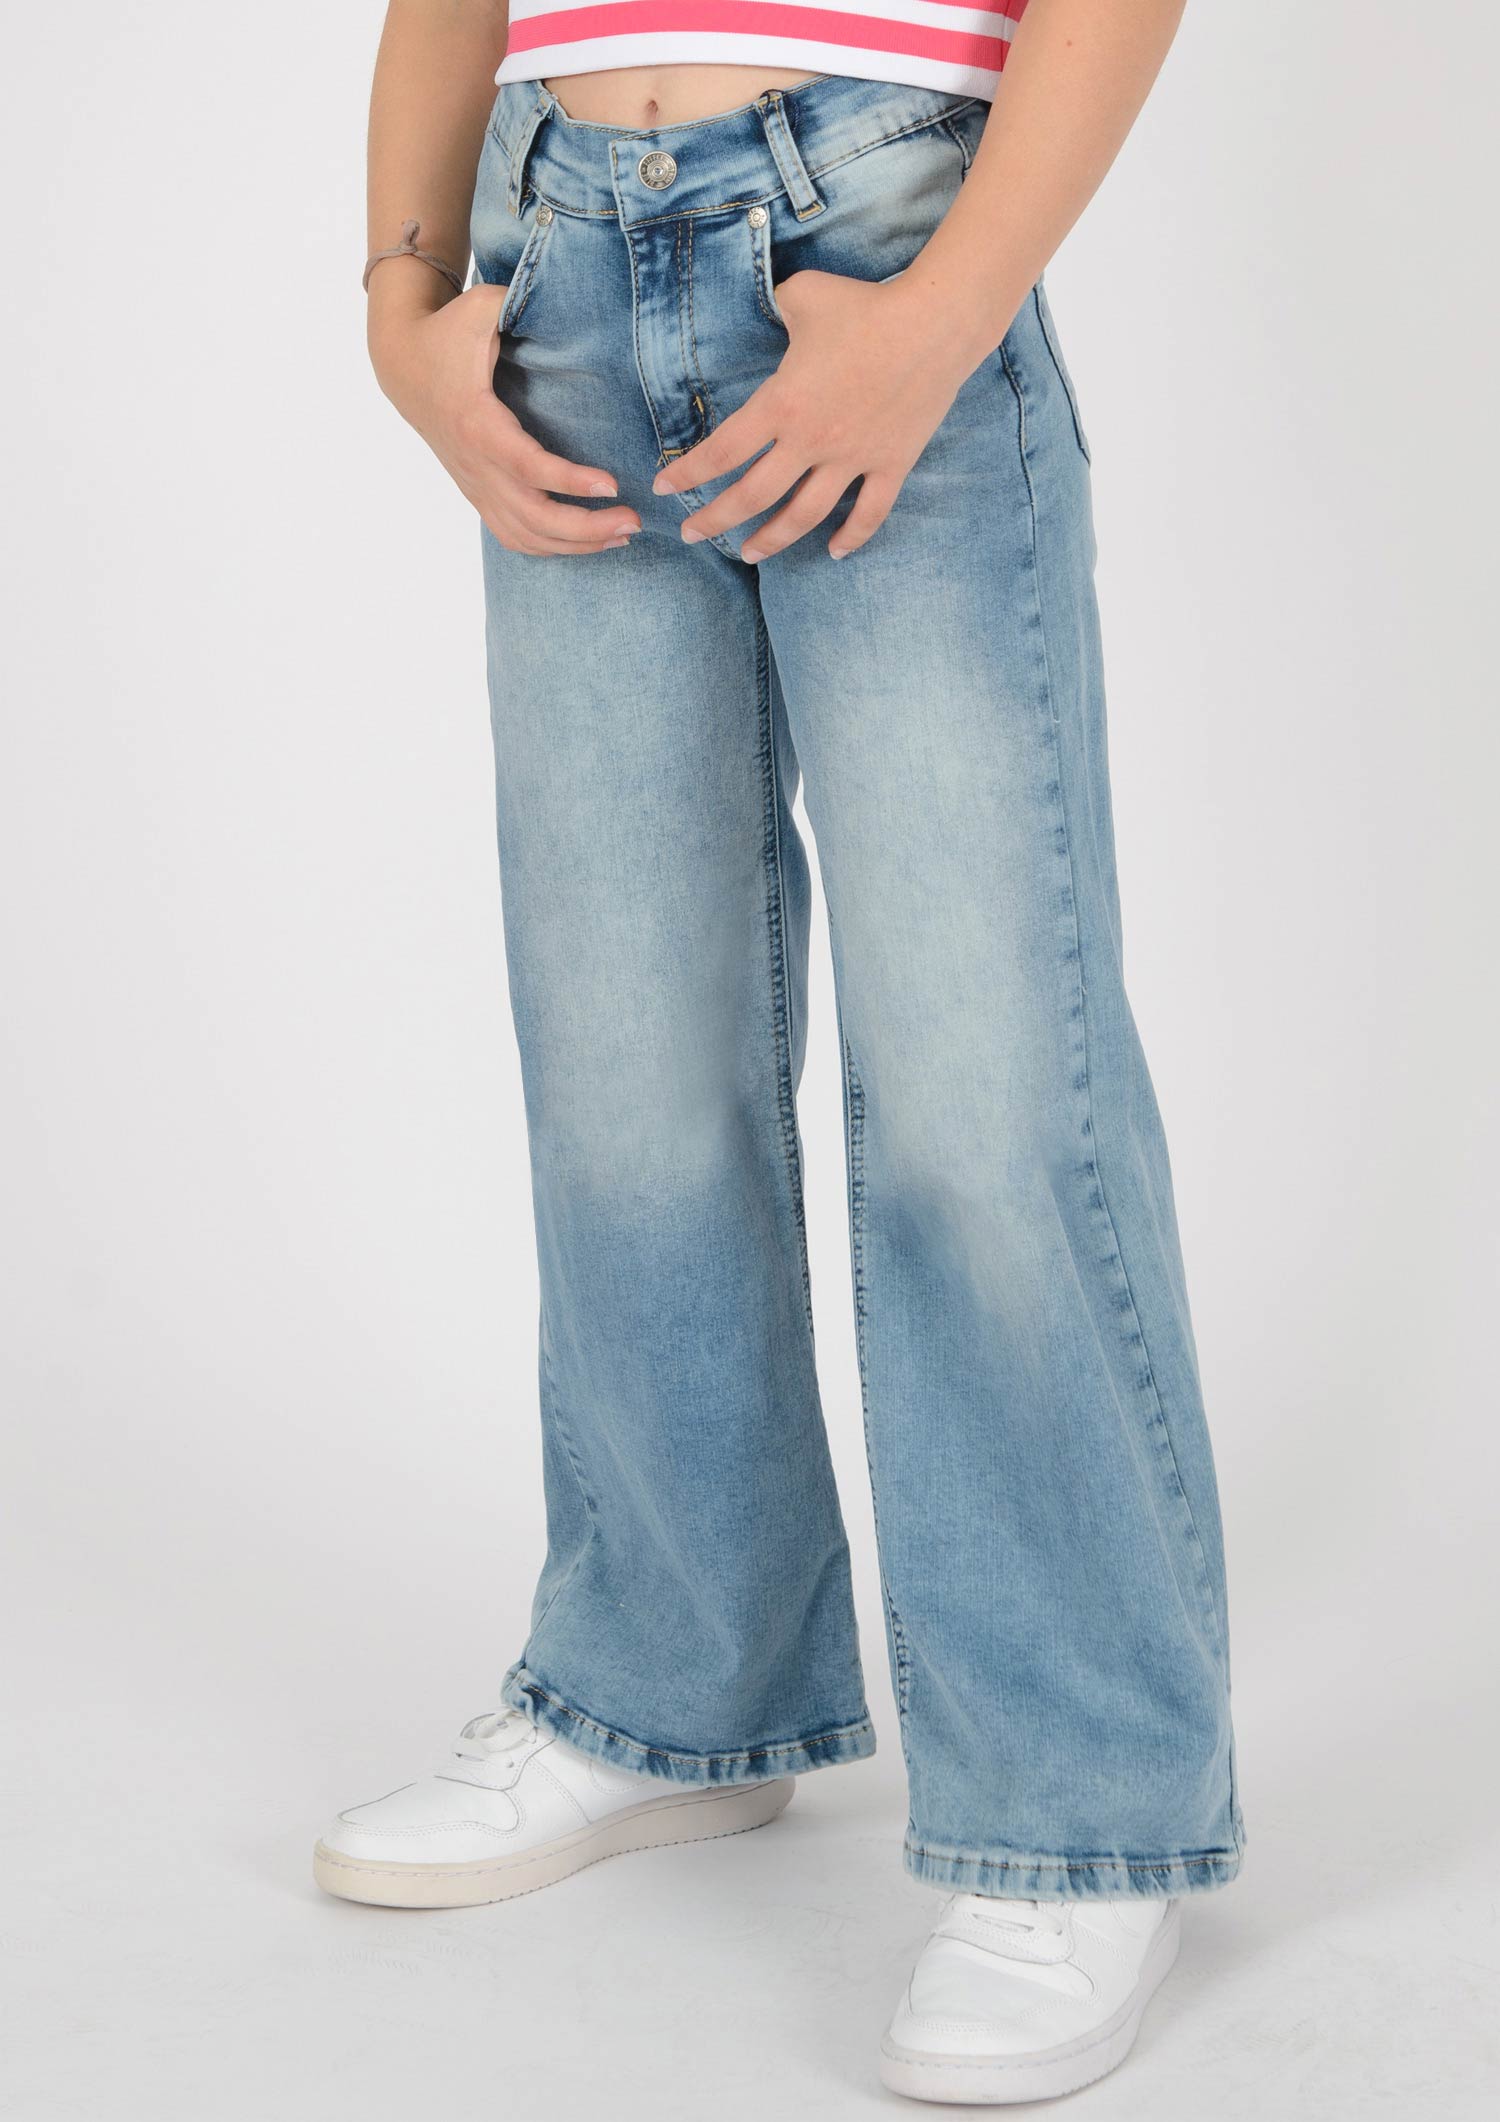 1331-Girls Wide Leg Jeans available in slim, normal